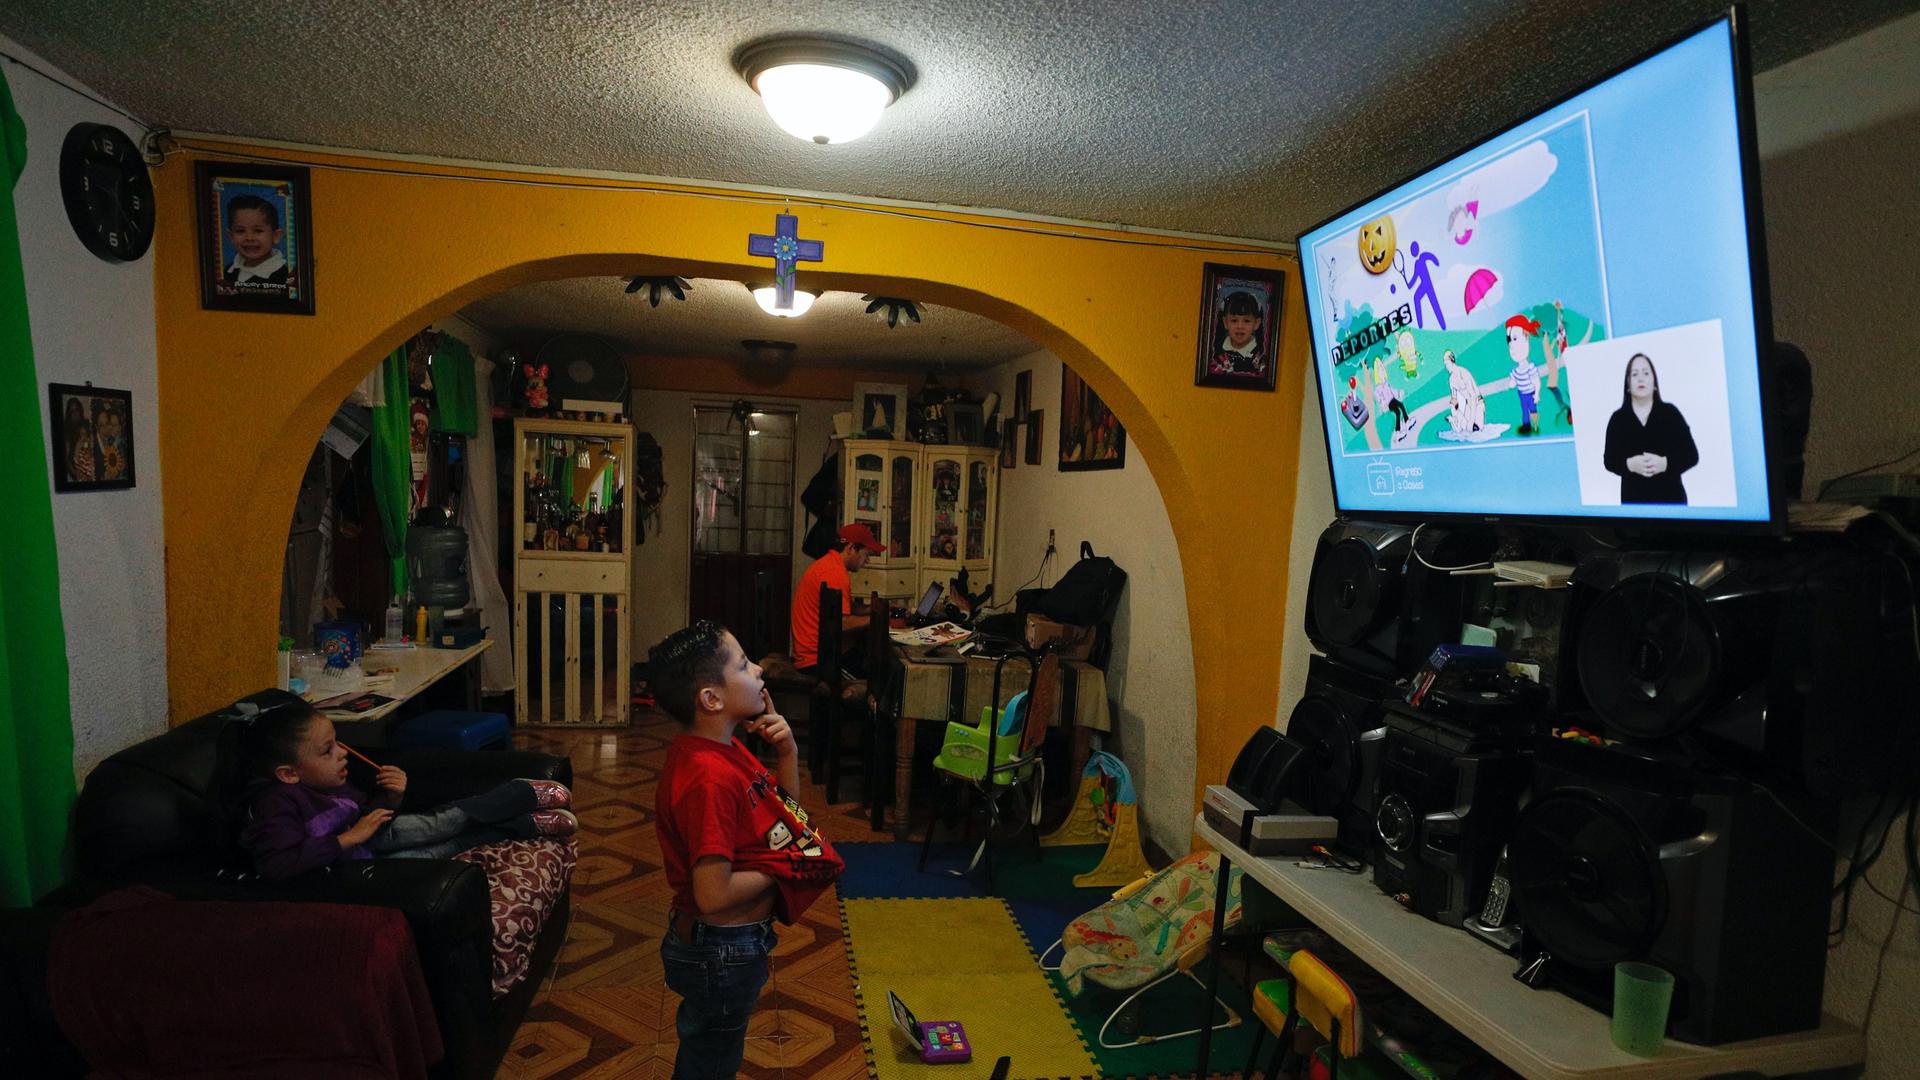 A child looks at a TV screen in a living room with orange painted walls. 